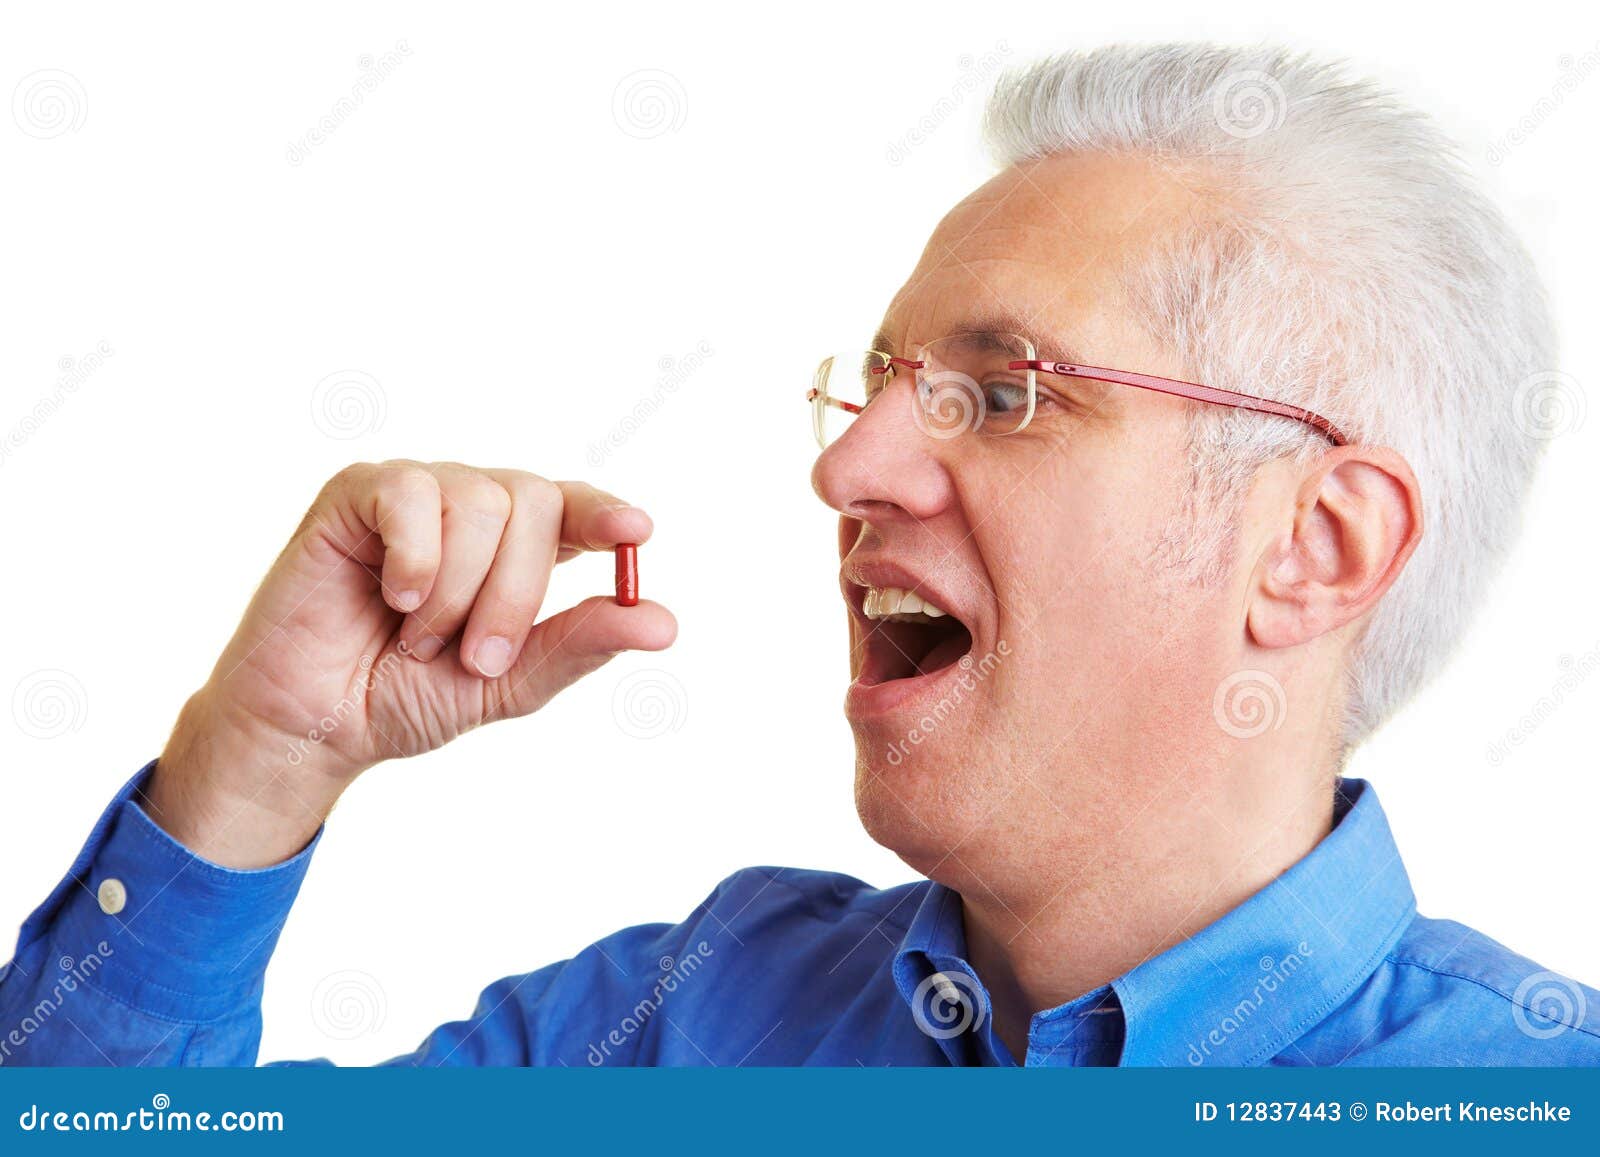 Man swallowing pill stock image. Image of pain, painkiller - 12837443